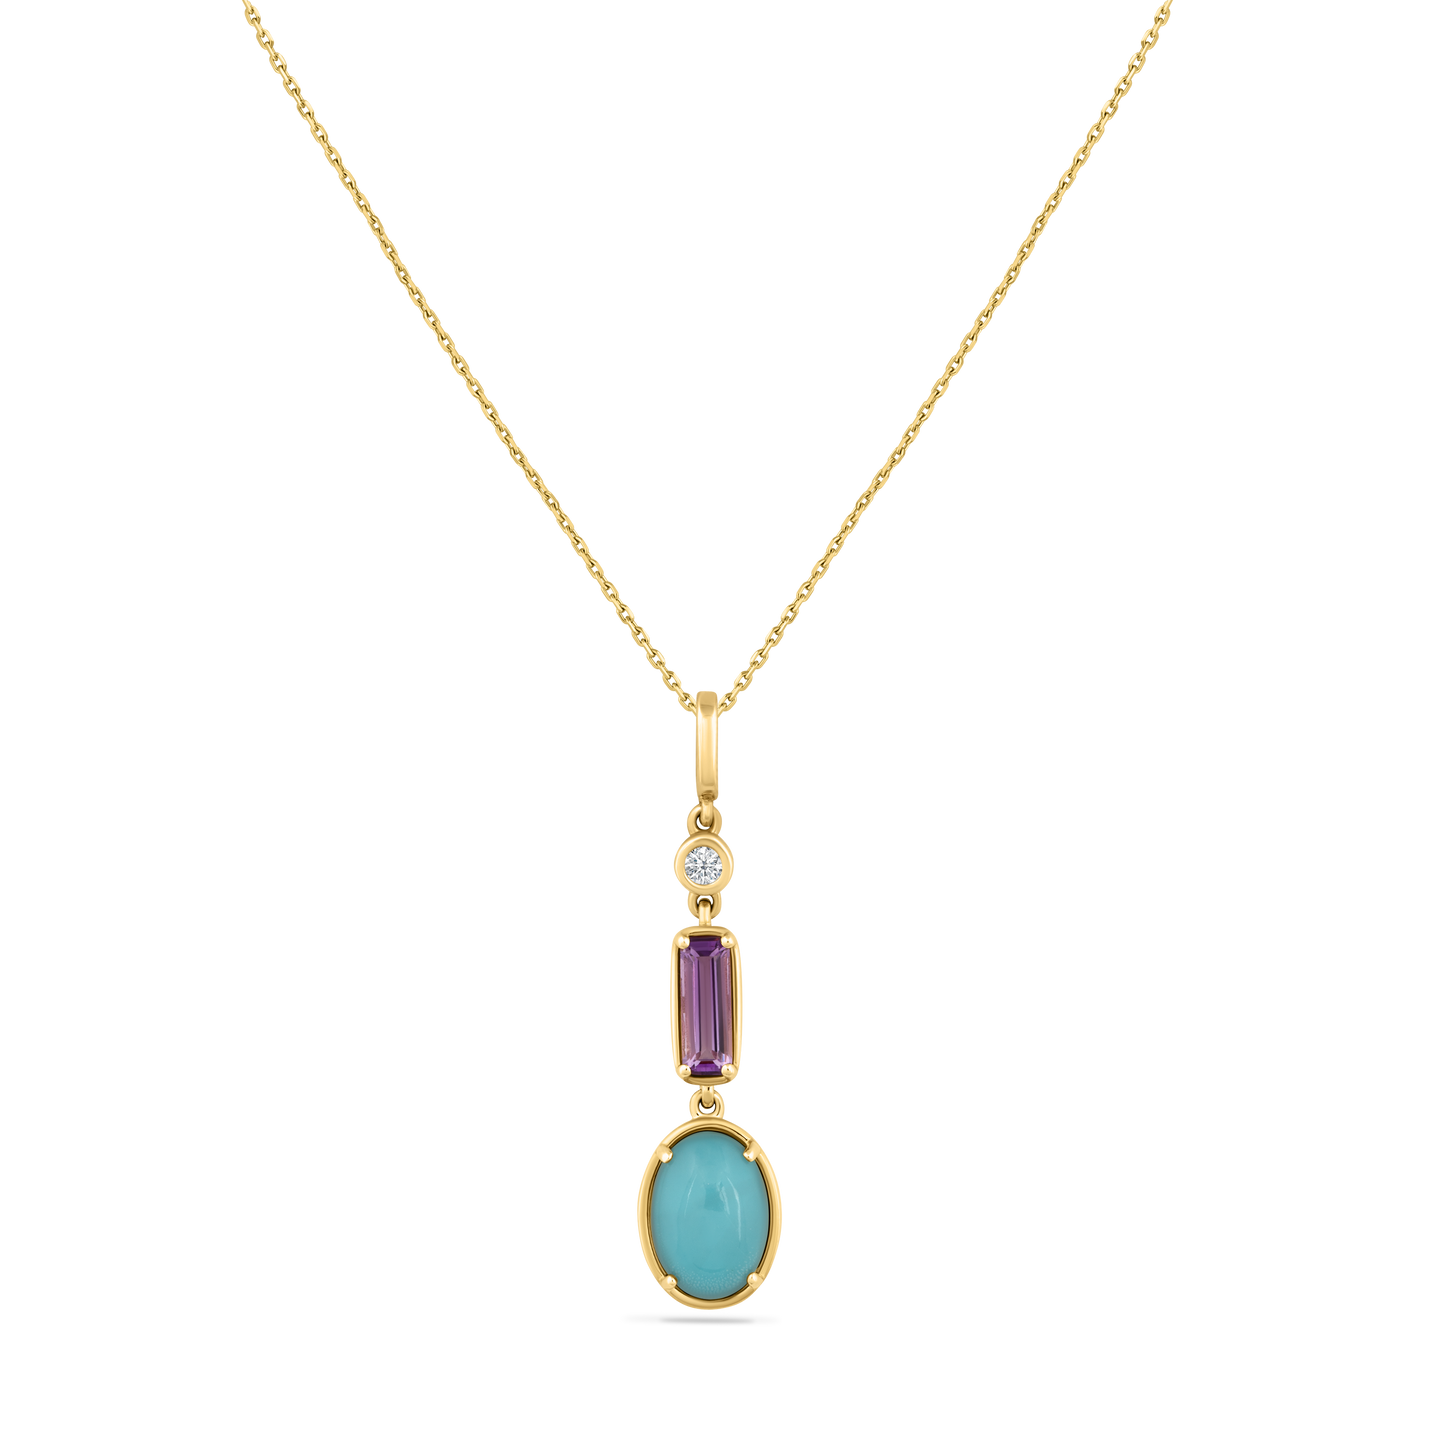 14K DROP PENDANT WITH DIAMOND, AMETHYST, DOUBLET WHITE TOPAZ & RECON TURQUOISE ON 18 INCHES CABLE CHAIN